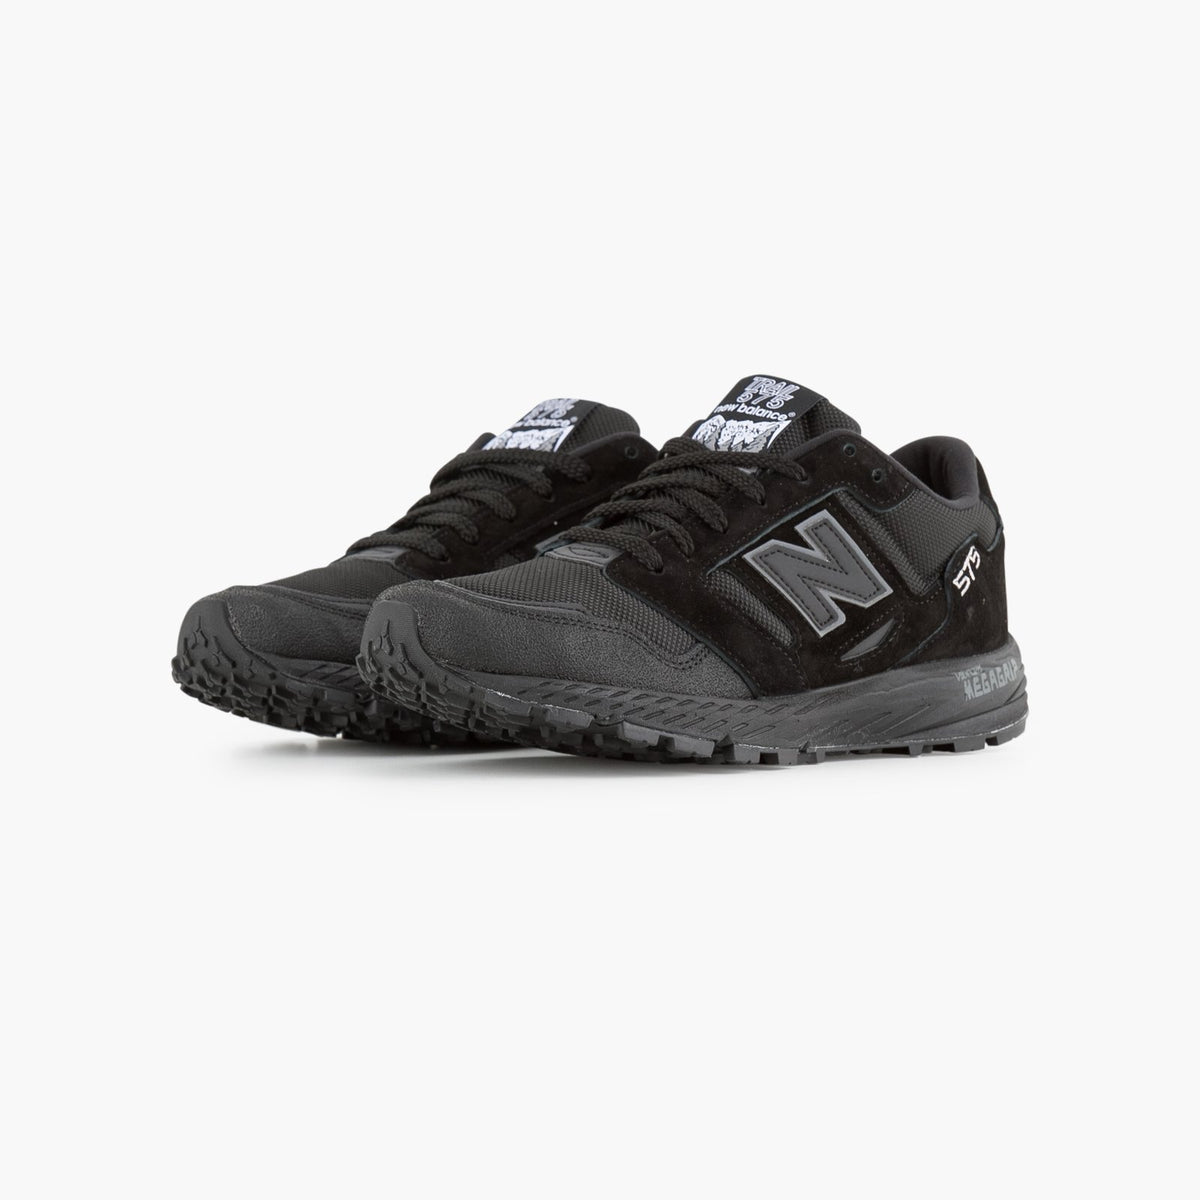 New Balance MTL575KL Made in England 